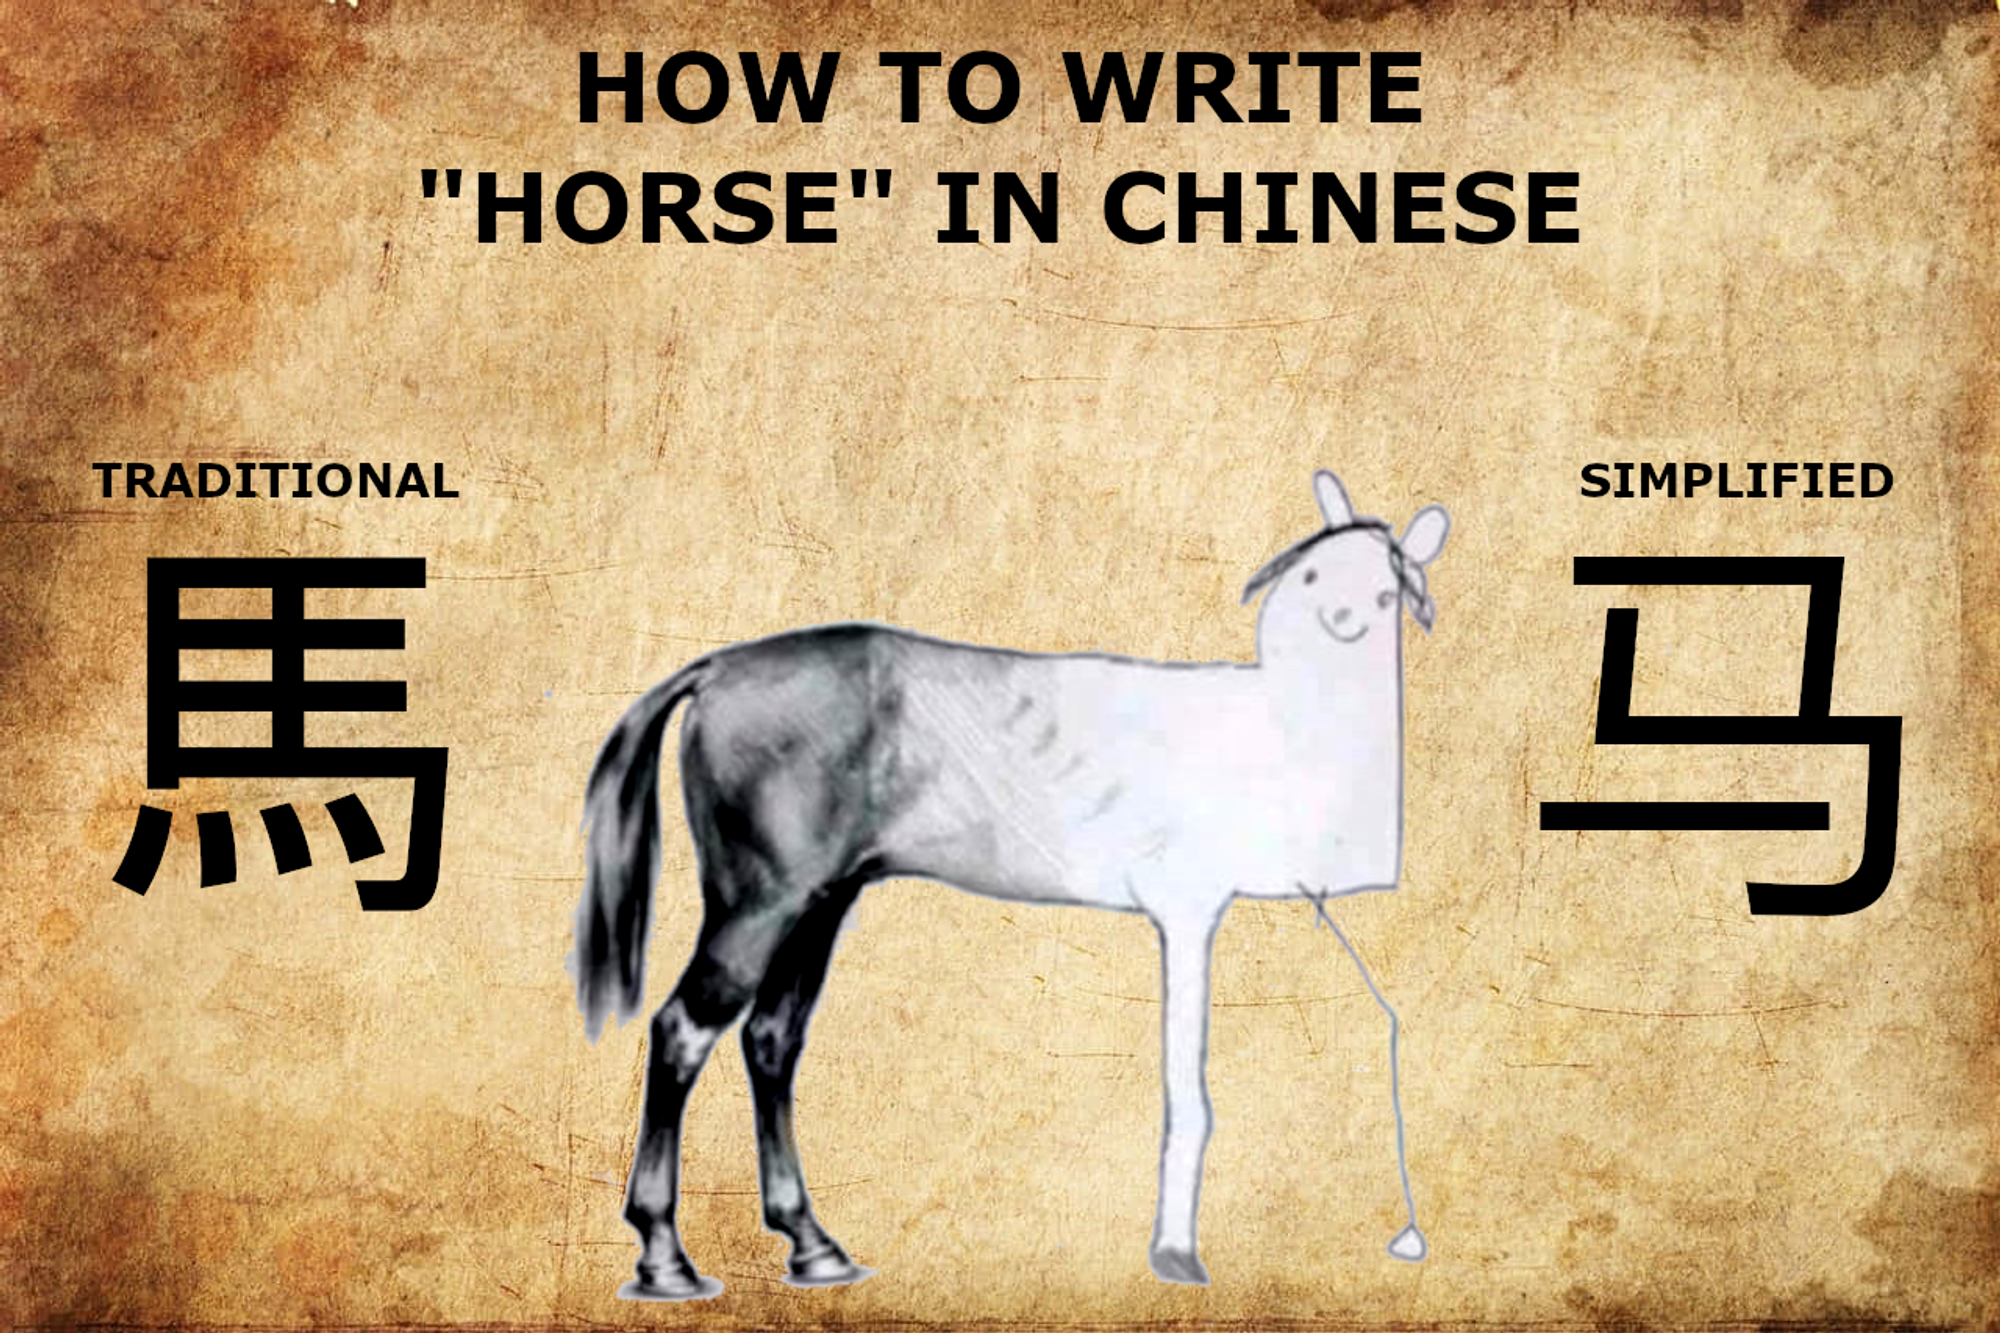 How and why was Chinese simplified?